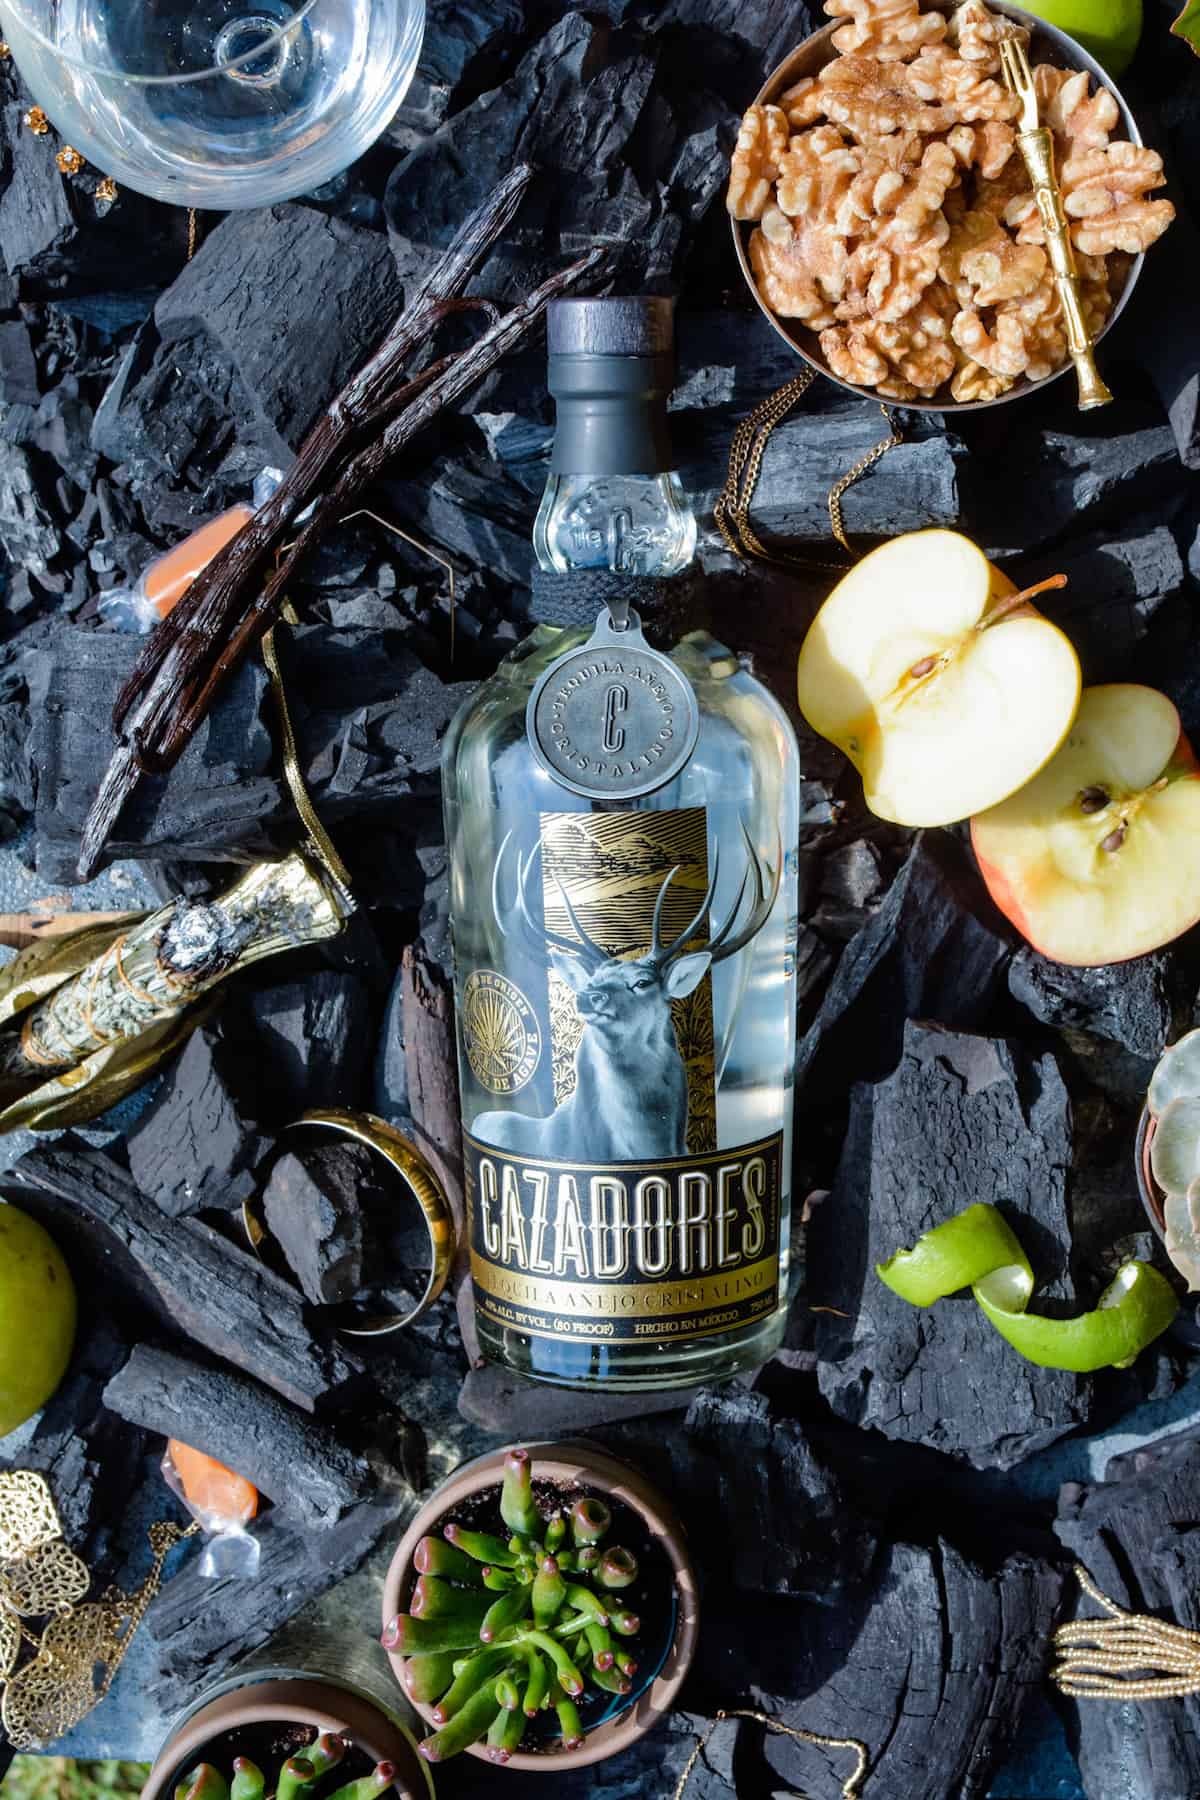 Cristalino Tequila is the newest variety of tequila to come out of Mexico and it is tremendous. An aged tequila that is crystal clear through a charcoal filtration process. Tequila Cazadores Cristalino is extraordinary. Click here to read more! {ad} #tequila #cristalinotequila #agedtequila #cazadores